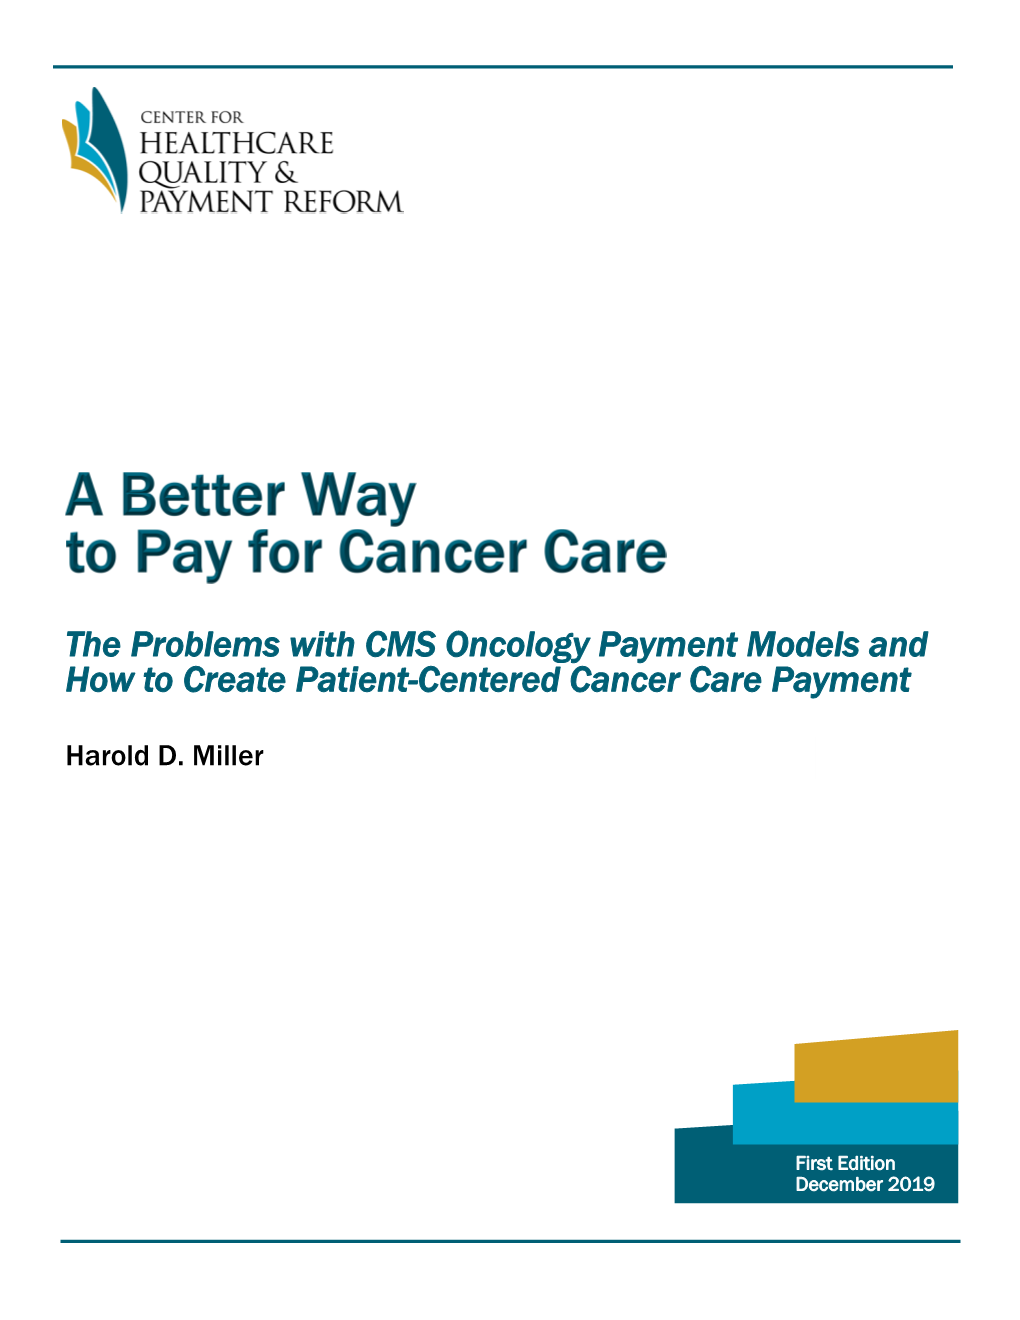 A Better Way to Pay for Cancer Care EXECUTIVE SUMMARY